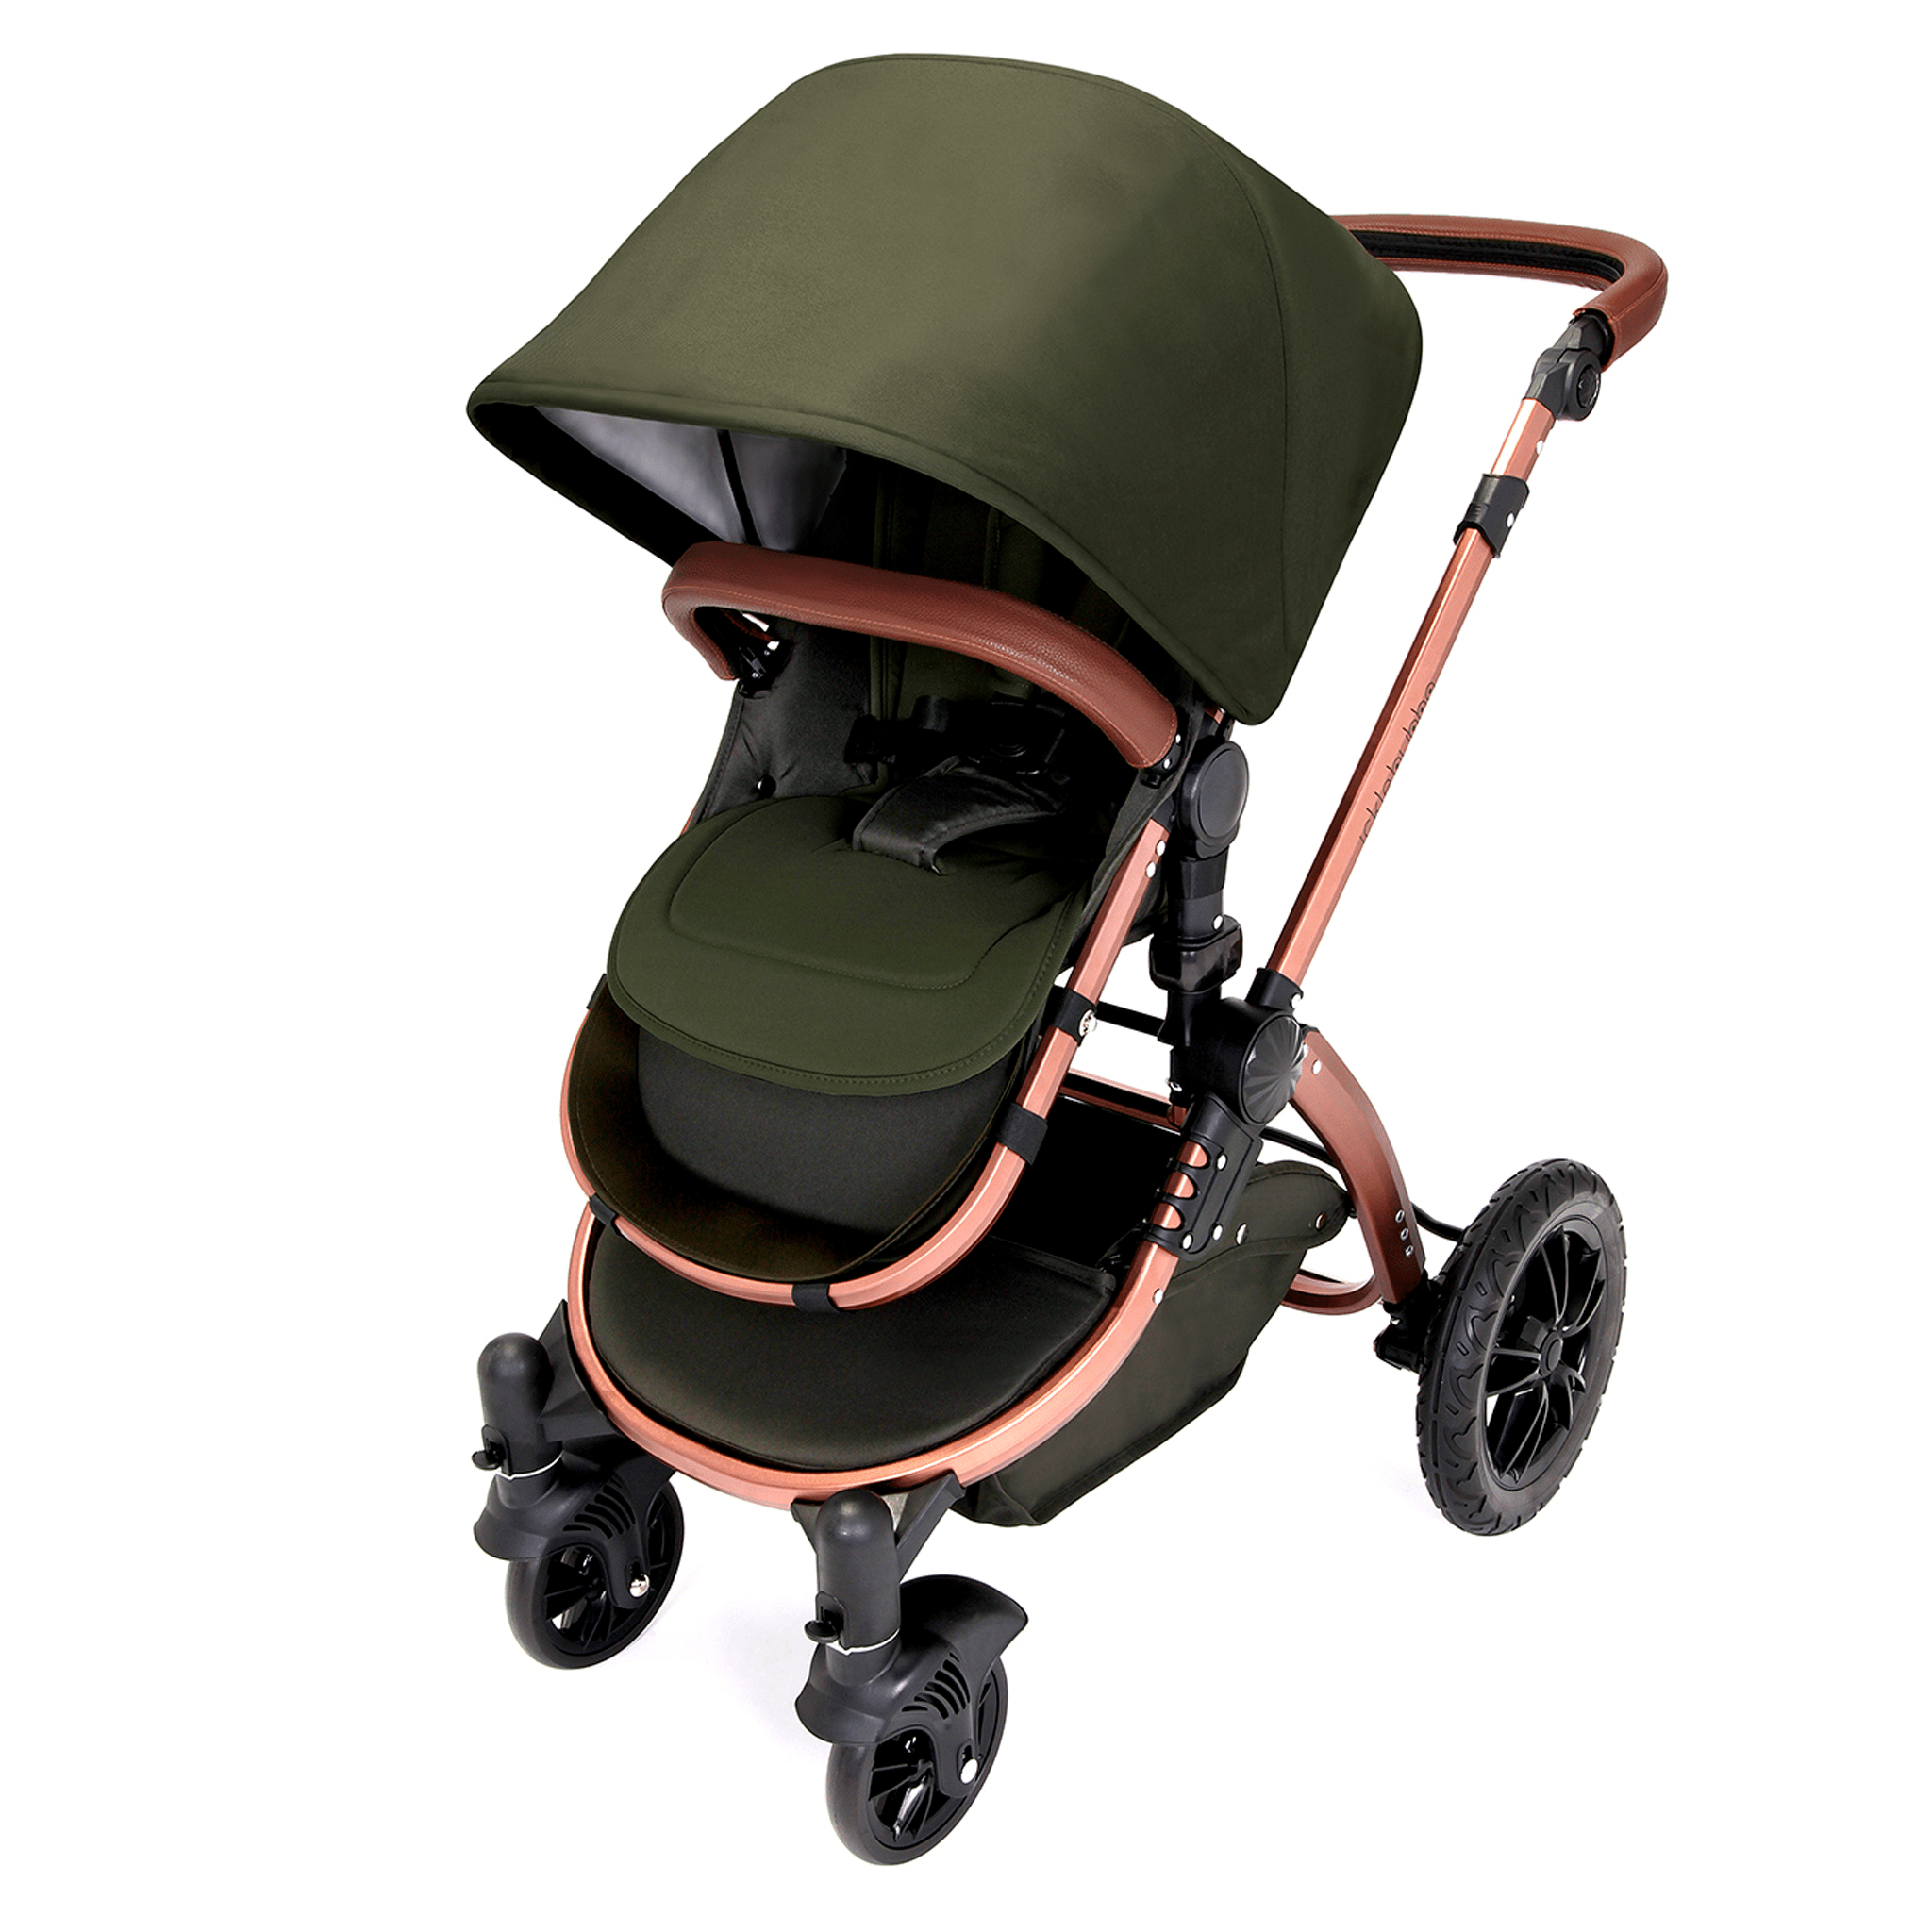 Ickle Bubba baby pushchairs Ickle Bubba Stomp V4 2-in-1 Pushchair Bronze/Woodland 10-004-000-022